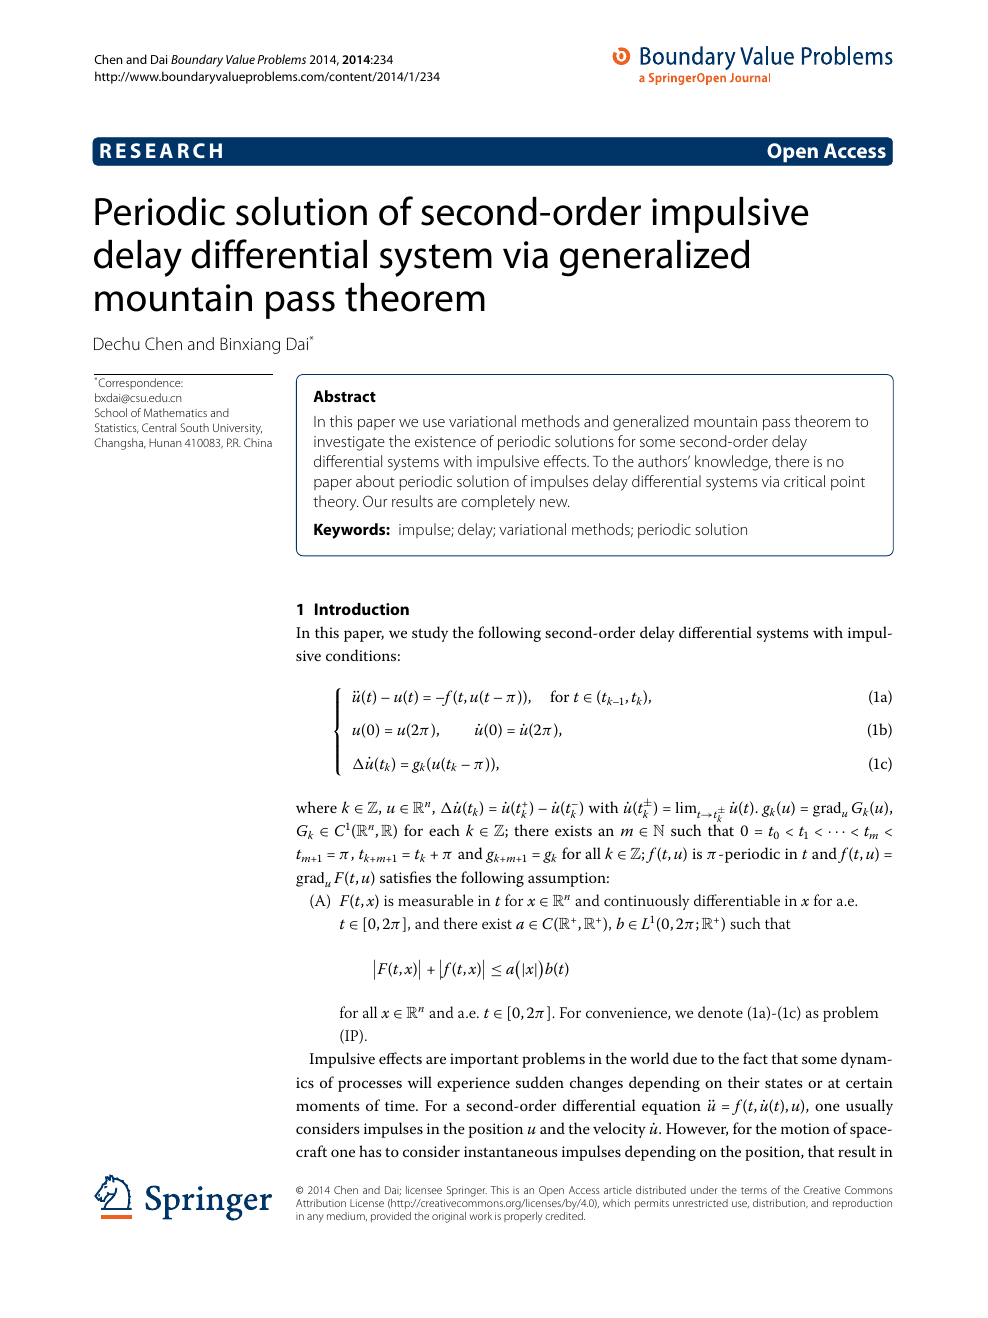 Periodic Solution Of Second Order Impulsive Delay Differential System Via Generalized Mountain Pass Theorem Topic Of Research Paper In Mathematics Download Scholarly Article Pdf And Read For Free On Cyberleninka Open Science